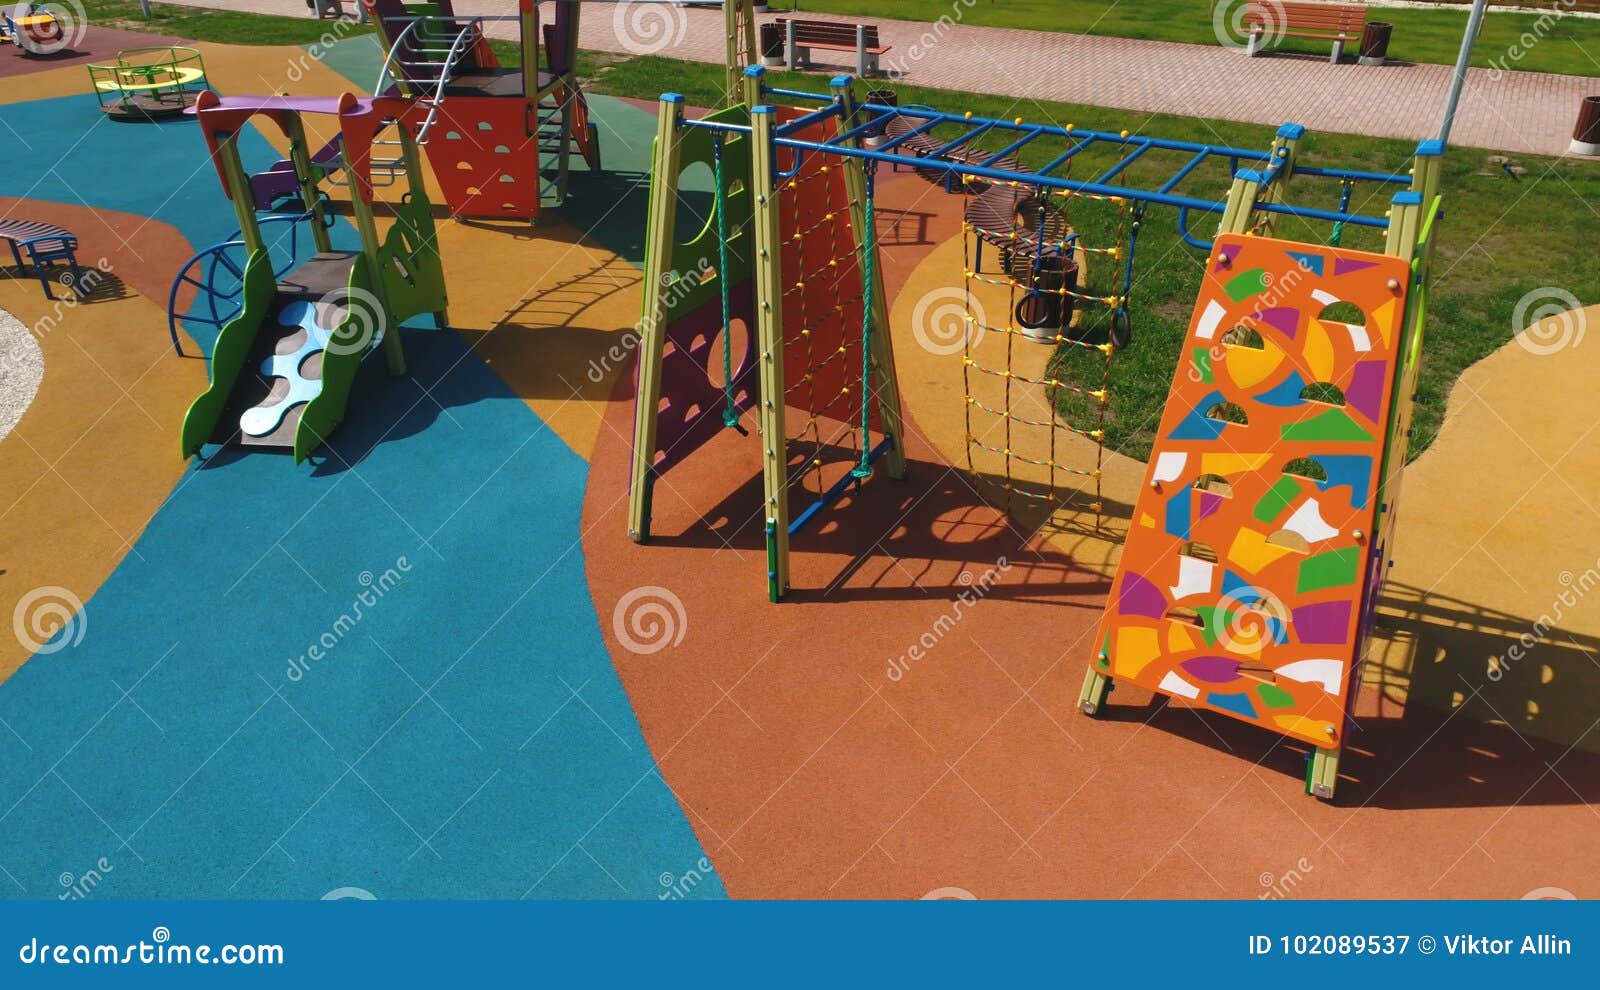 Elevated View Of Slides Swings In The Park Children Outdoor Play